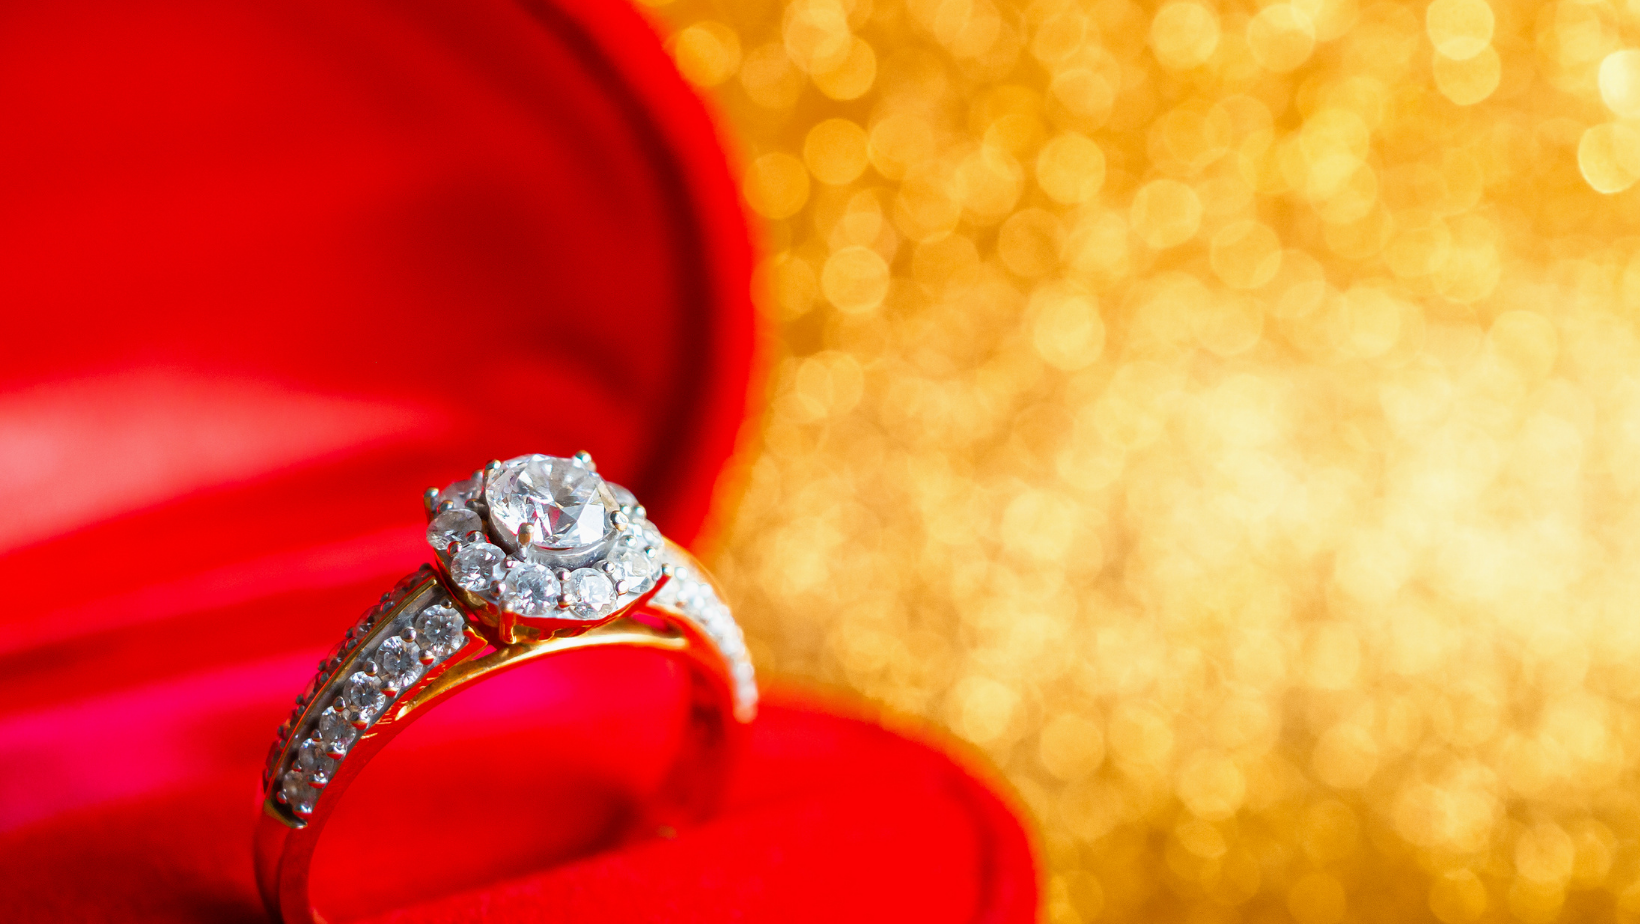 Silver and Diamond Ring on a red cloth